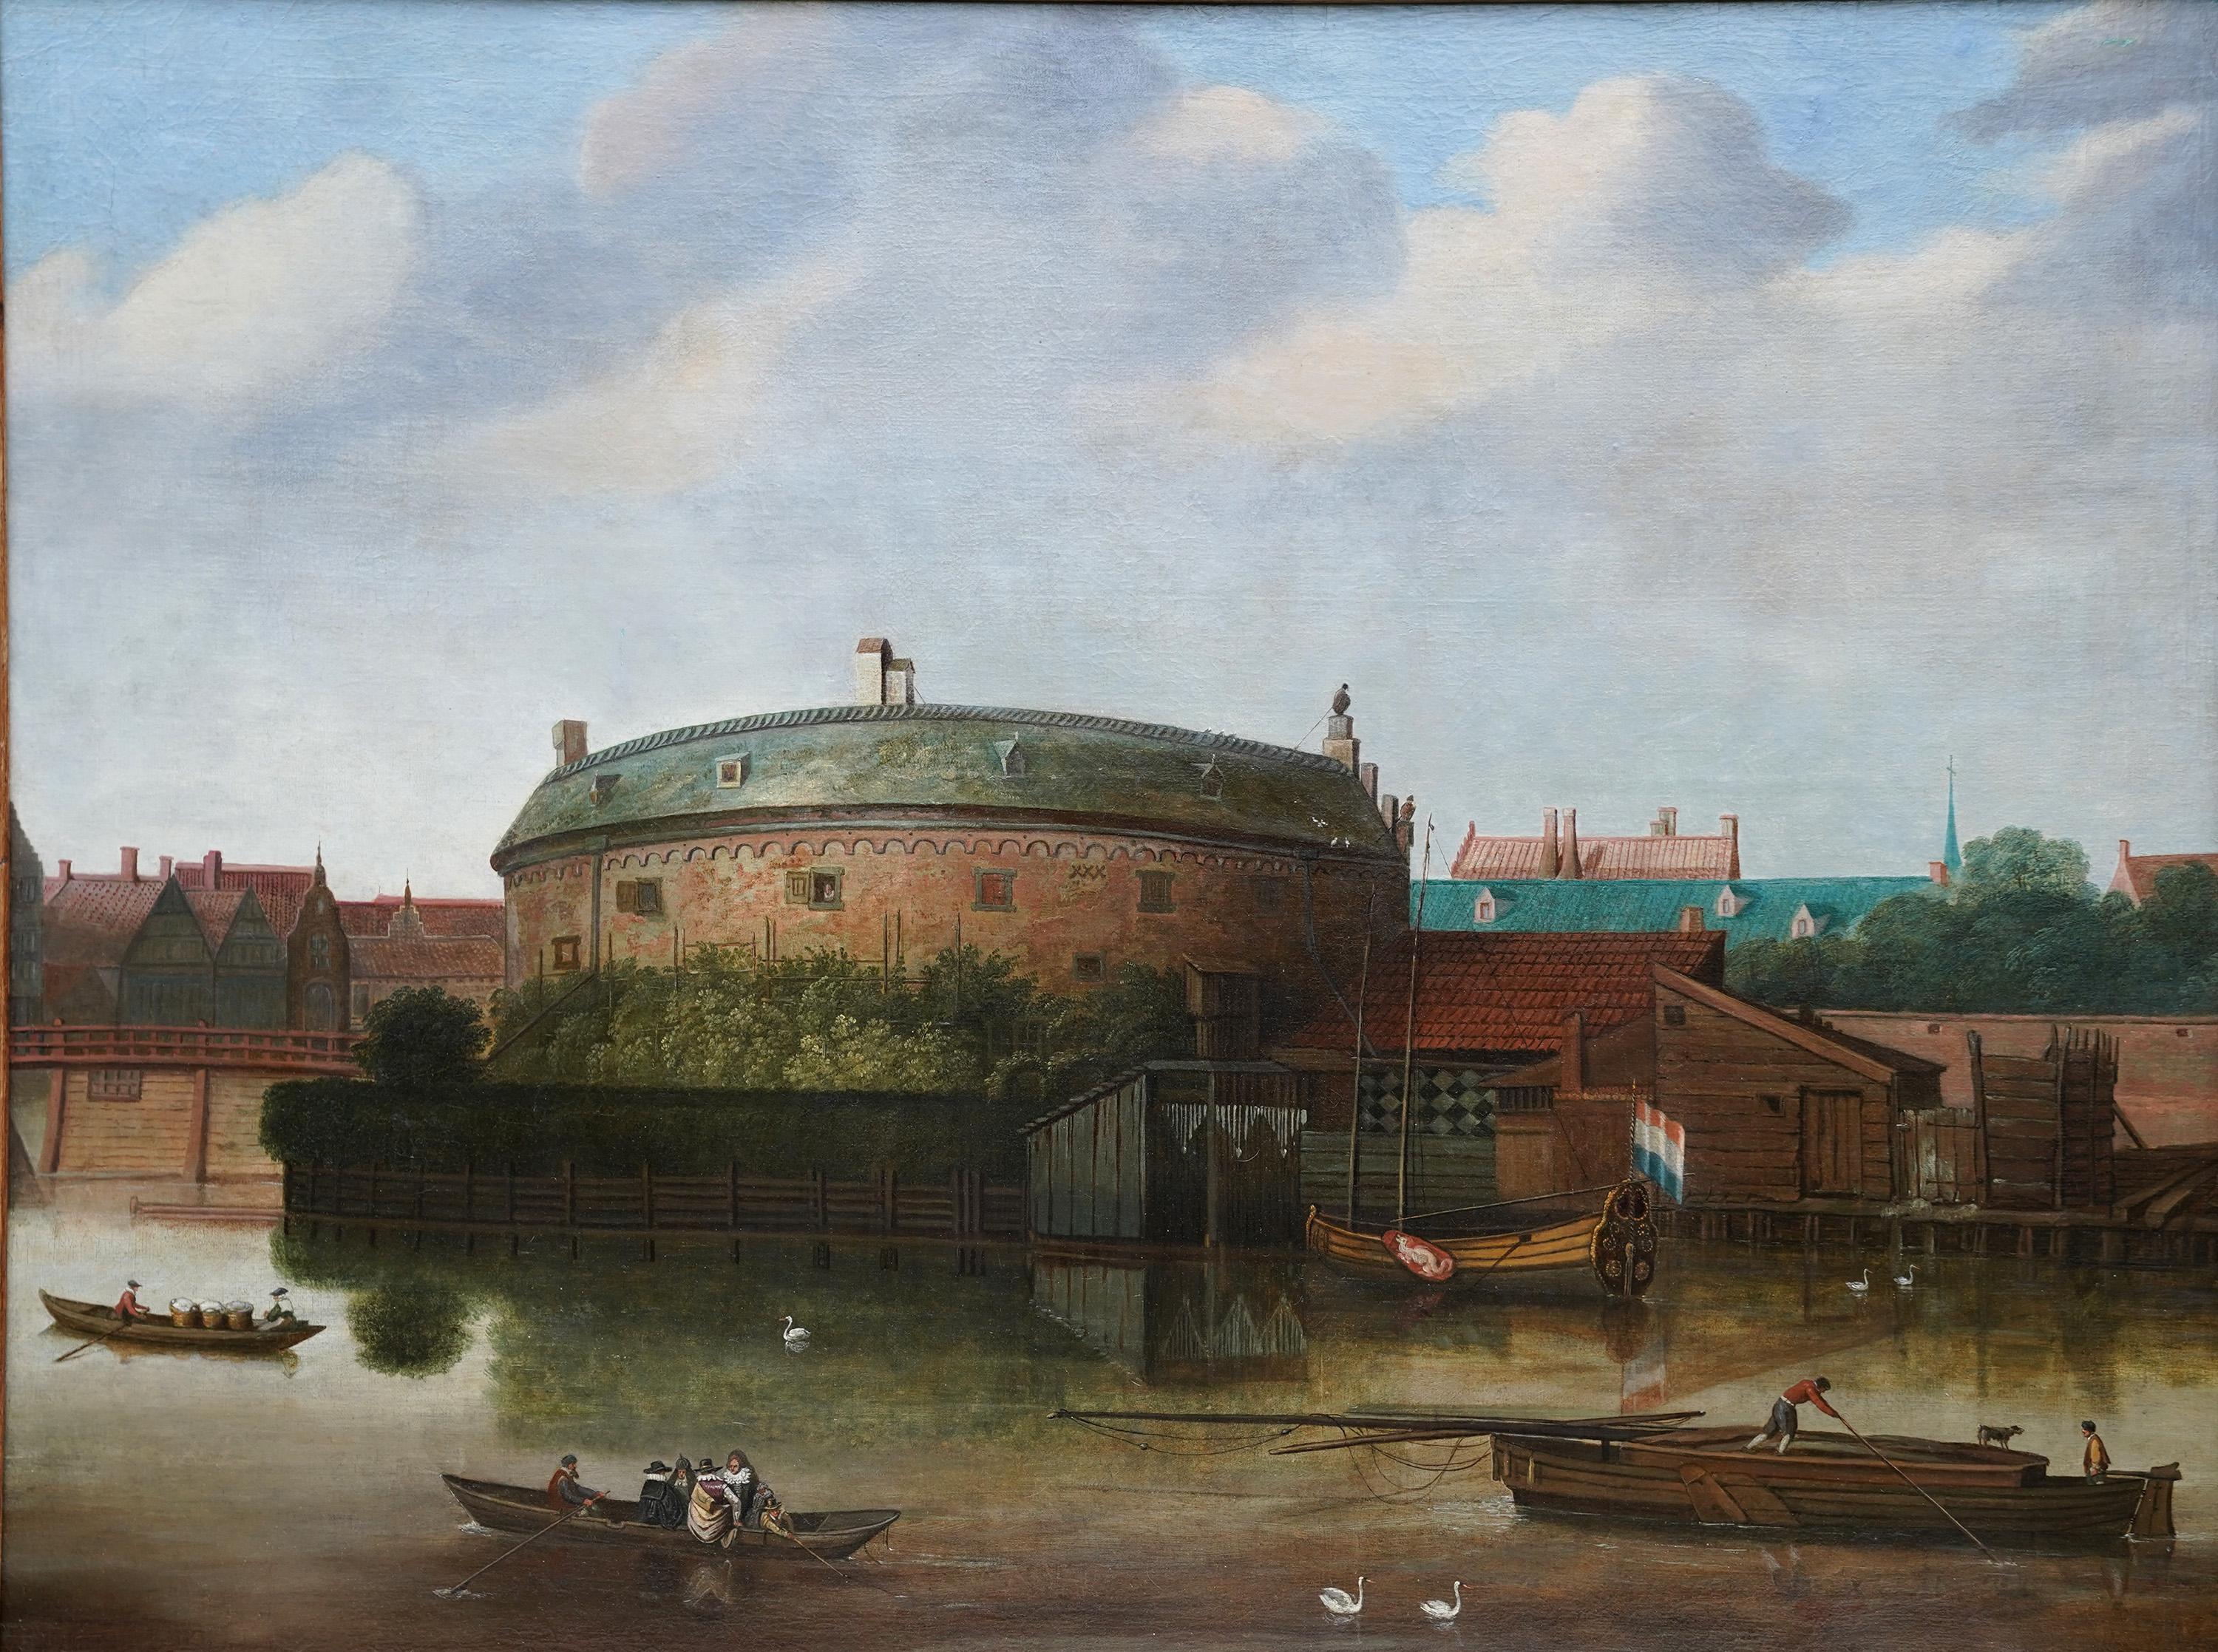 River Scene with Boats and Rotunda Building - Dutch 18th/19thC art oil painting For Sale 7